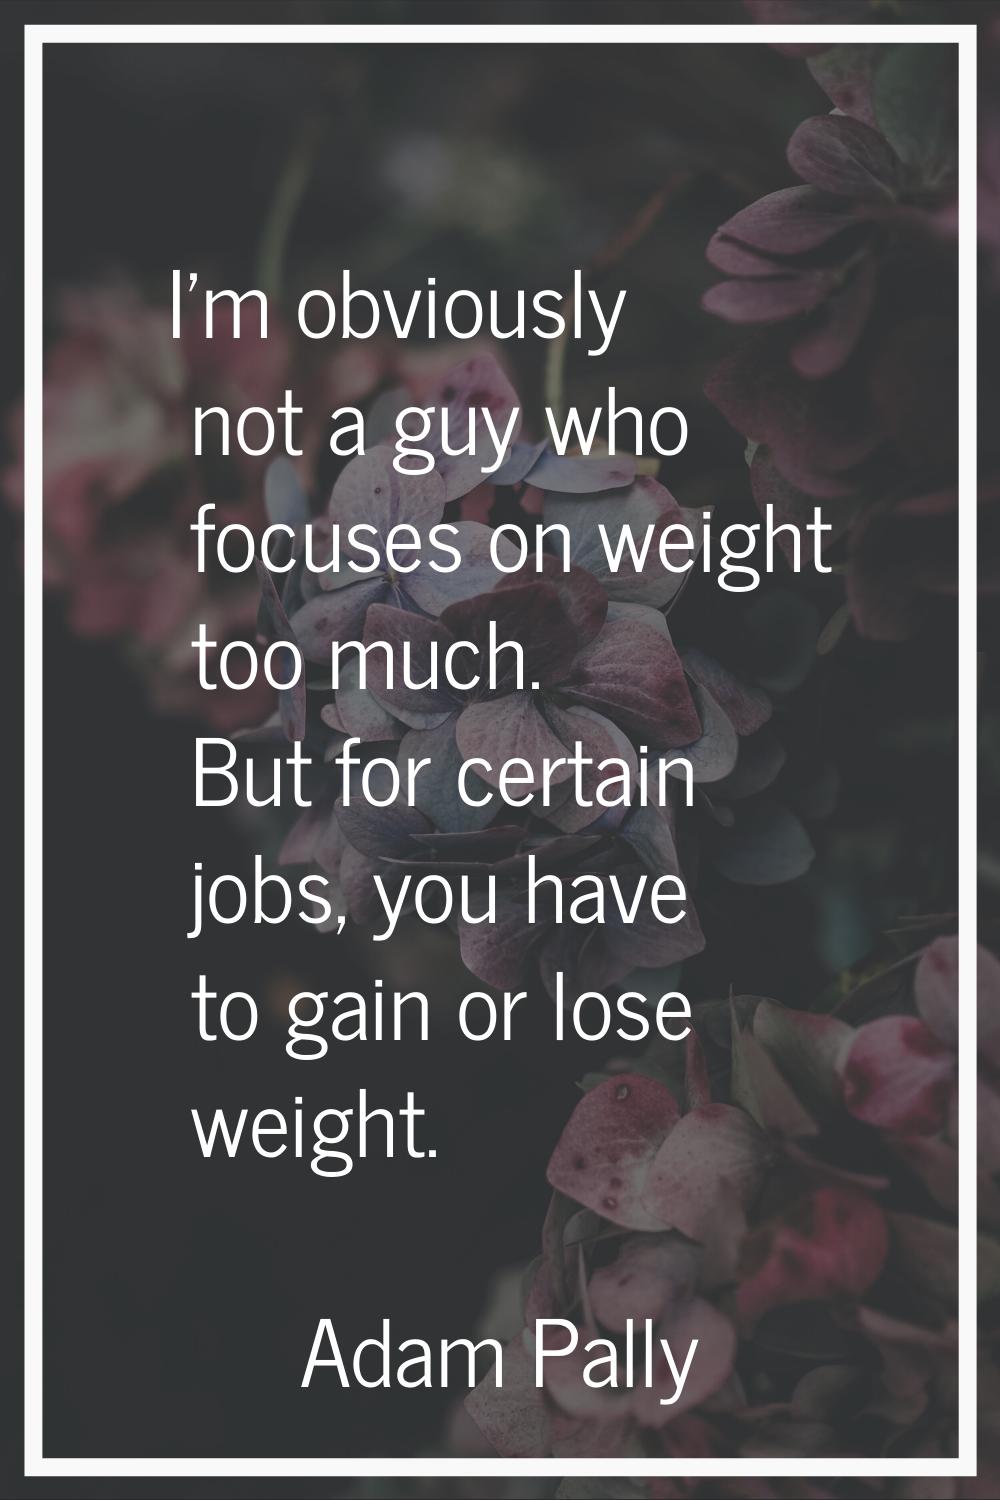 I'm obviously not a guy who focuses on weight too much. But for certain jobs, you have to gain or l